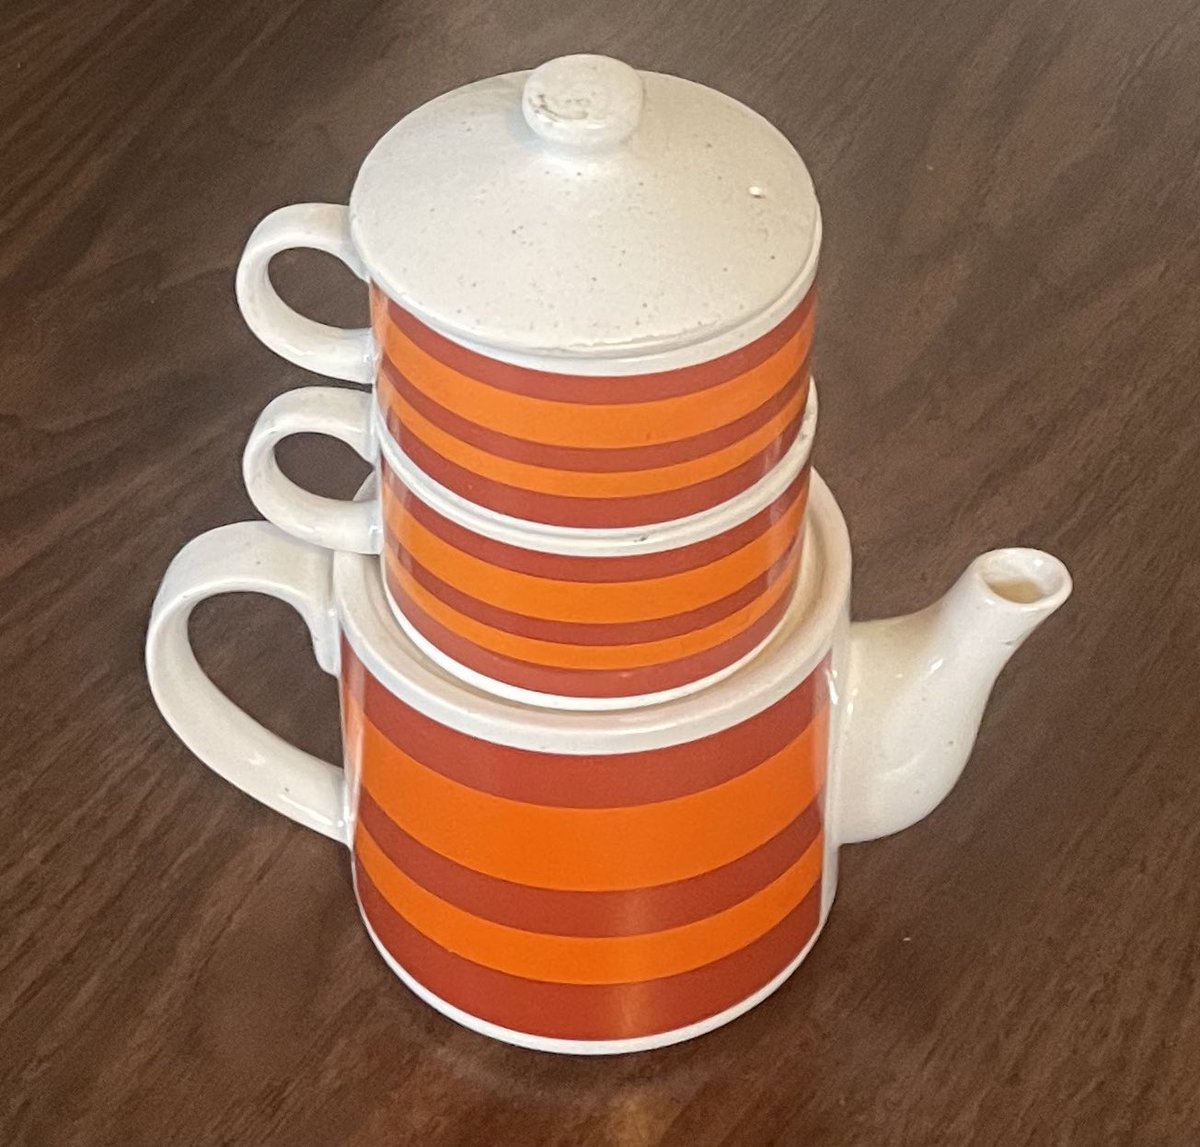 Our challenge for the next 2 wks is to post one new thing every day that we’re going to have at the @PGHVintageMixer! First up…this great Tea for Two set definitely has some 70s vibes with those thick orange stripes. #pghvintagemixer #vintage #pittsburgh #teapot #tea #teacup